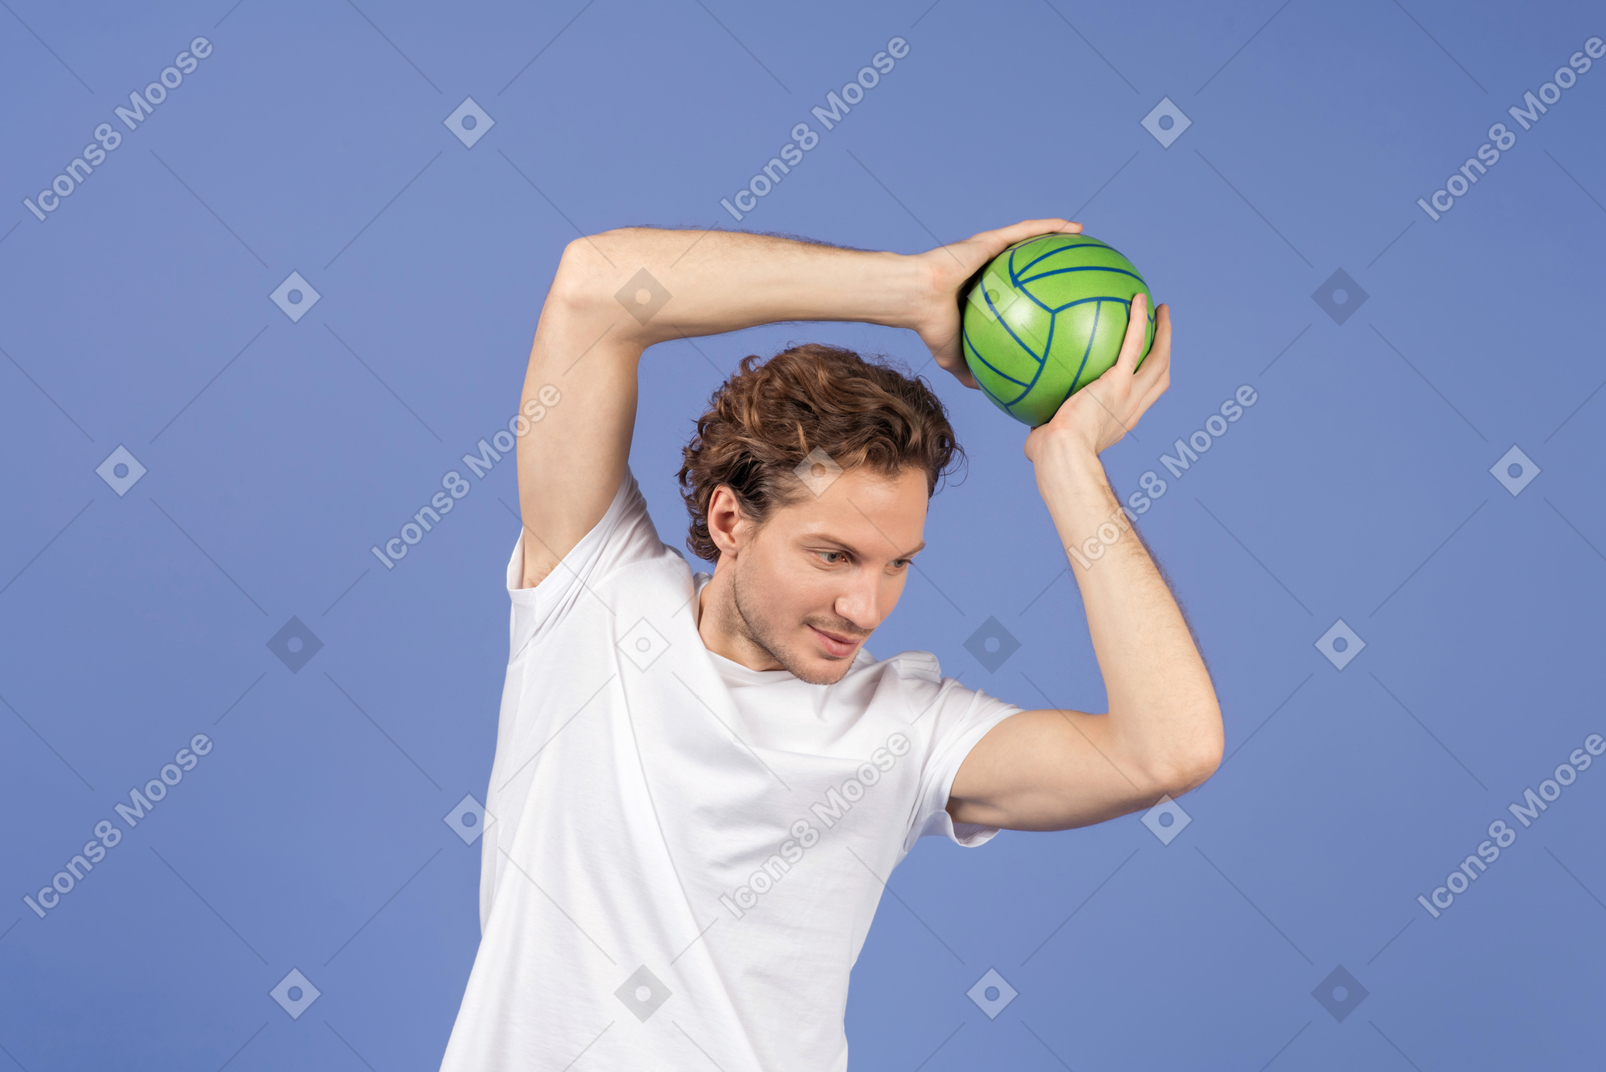 Stretching with a ball